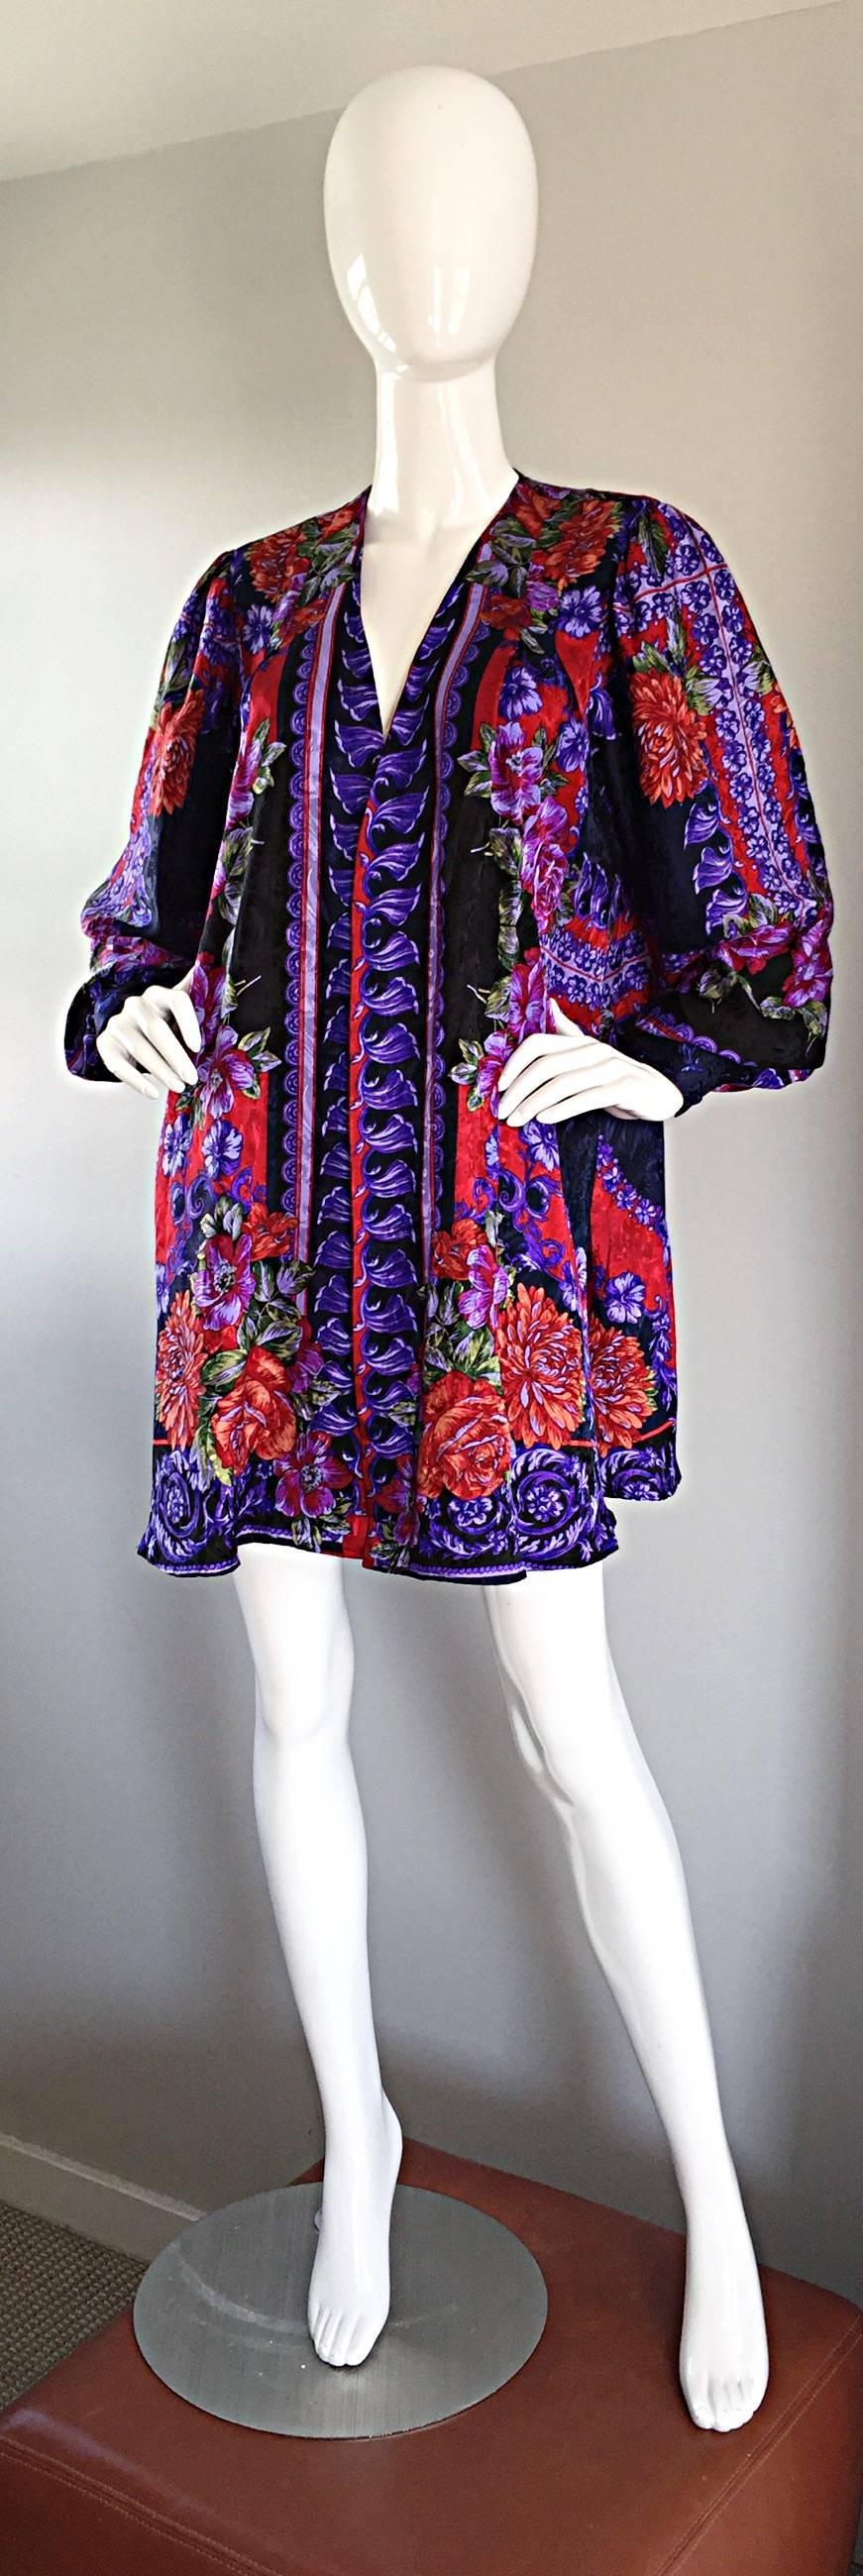 Amazing vintage DIANE FREIS / Fres colorful silk bohemian kimono jacket! Luxurious lightweight silk, with fantastic prints throughout. Open front makes this an easy transitional piece! Features buttons at each cuff, with full flowy sleeves. Two